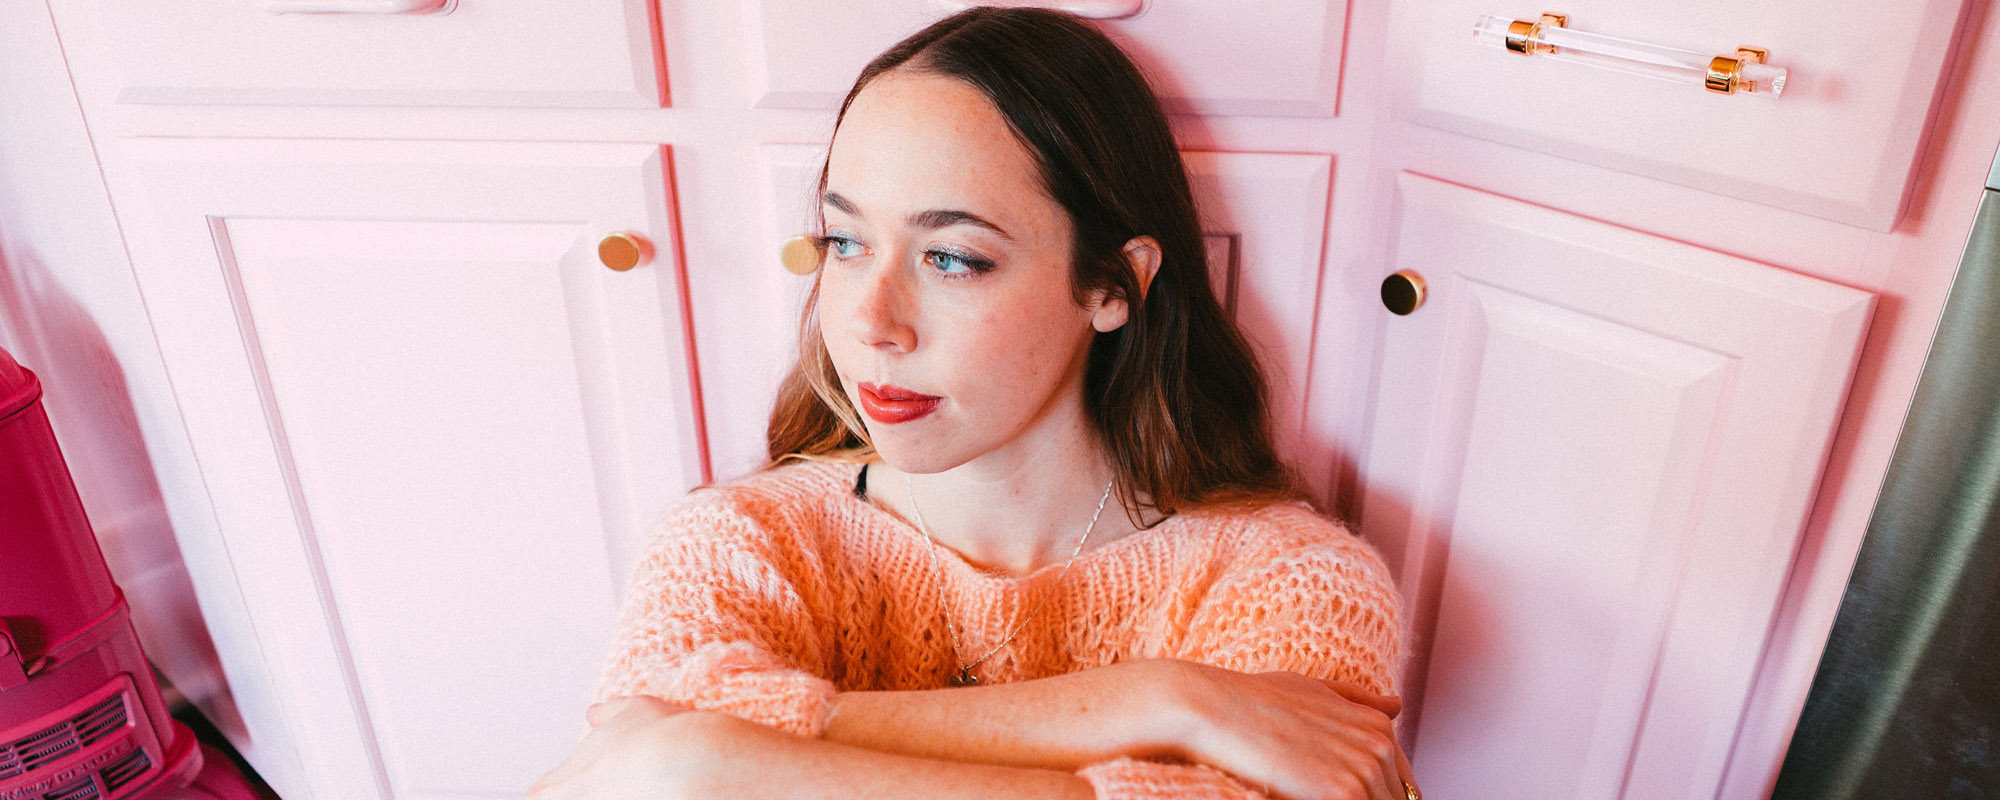 Review: With Her Latest Album, Sarah Jarosz Partakes of Both Inspiration and Optimism